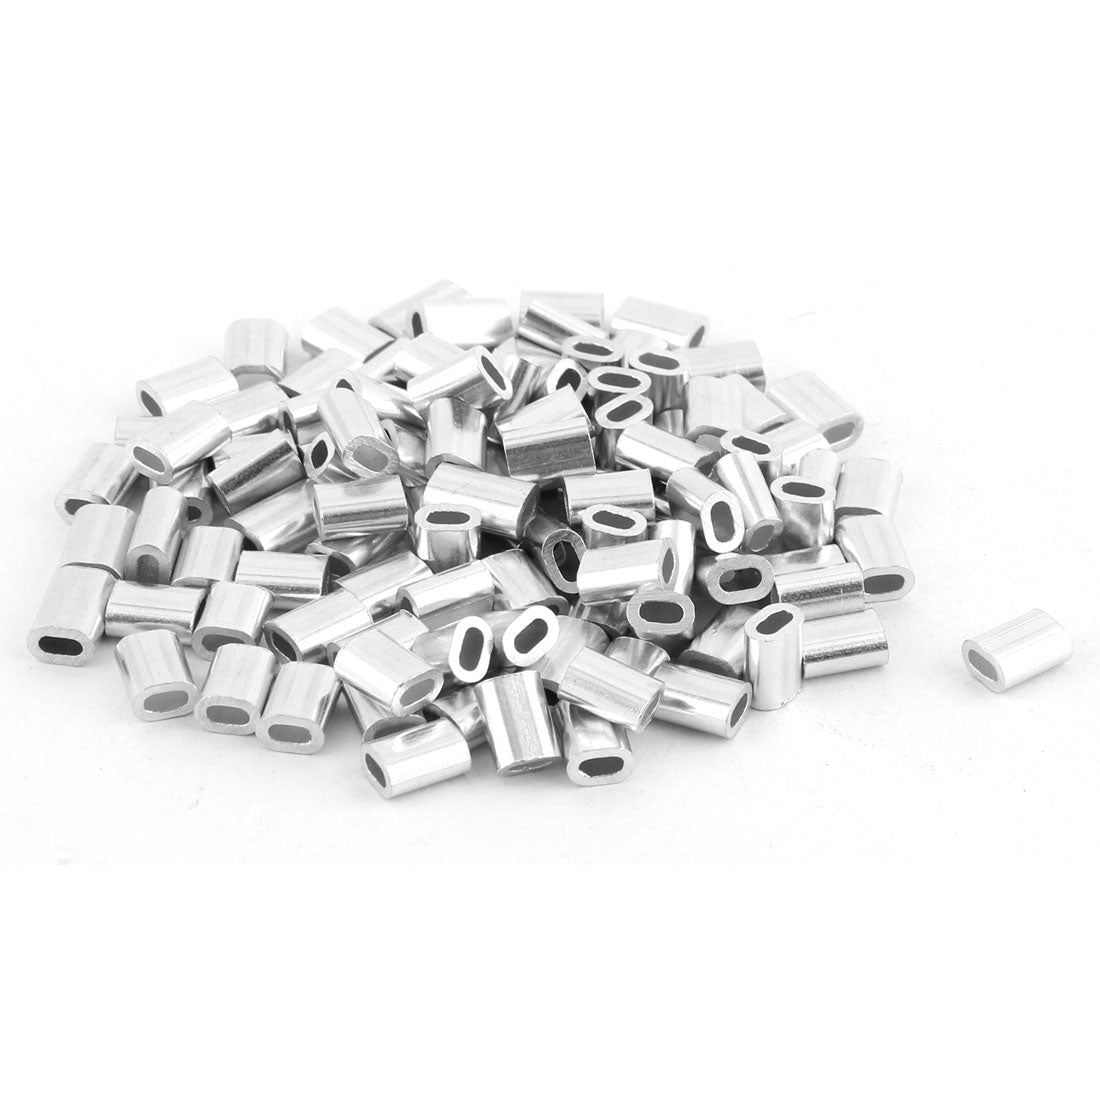 uxcell Uxcell Aluminum Oval Ferrules Sleeves 5mm x 3mm Silver Tone 100pcs for 1.2mm Dia Steel Wire Rope